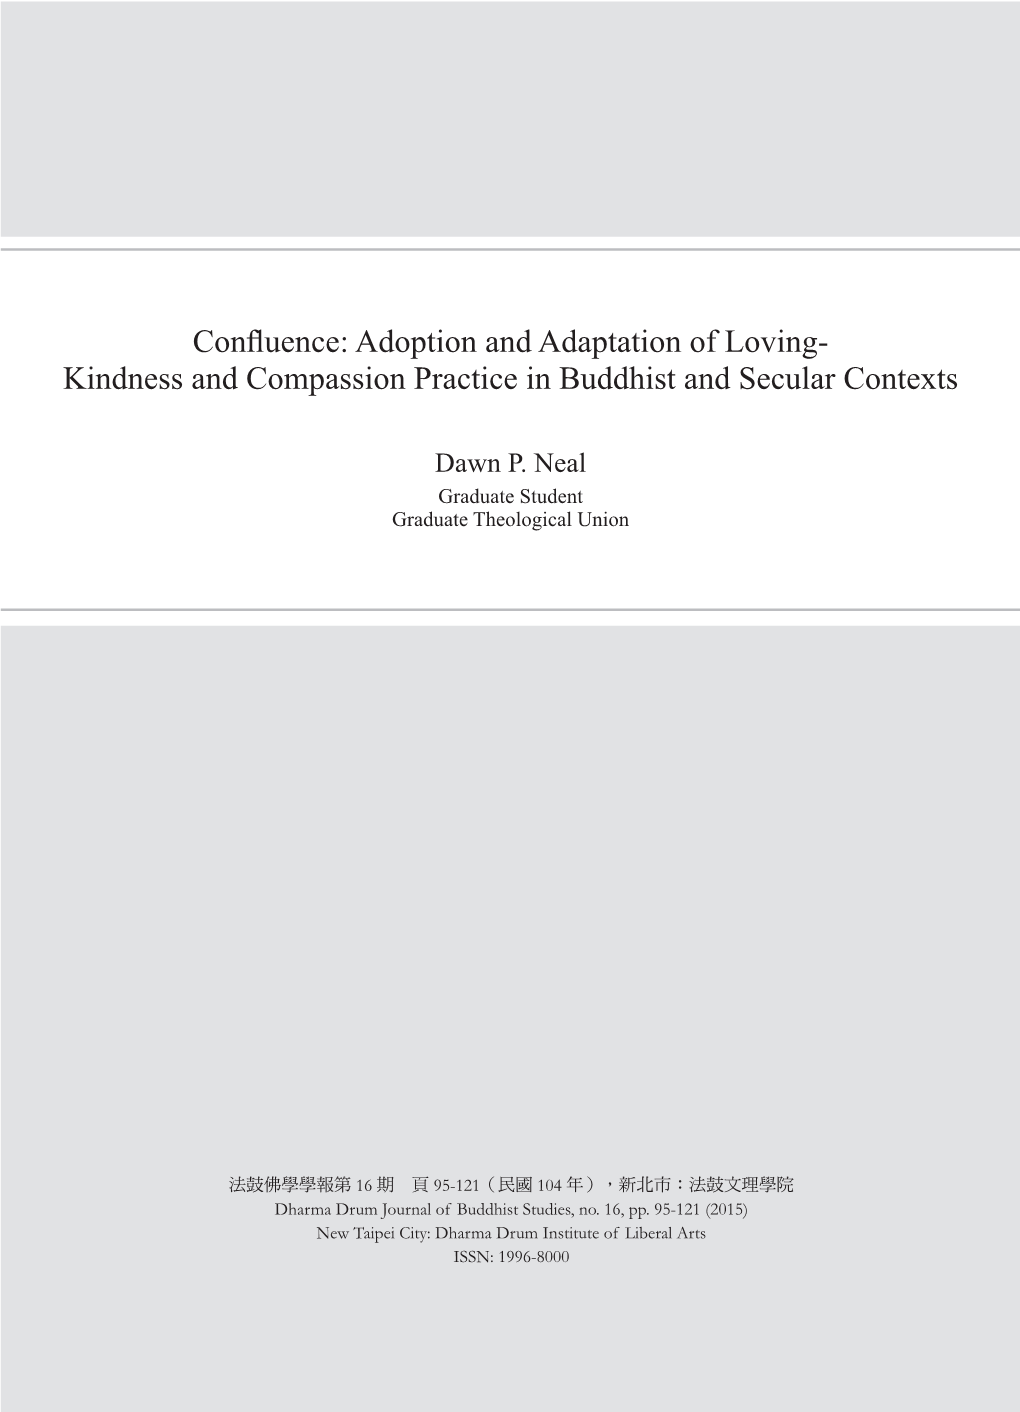 Kindness and Compassion Practice in Buddhist and Secular Contexts